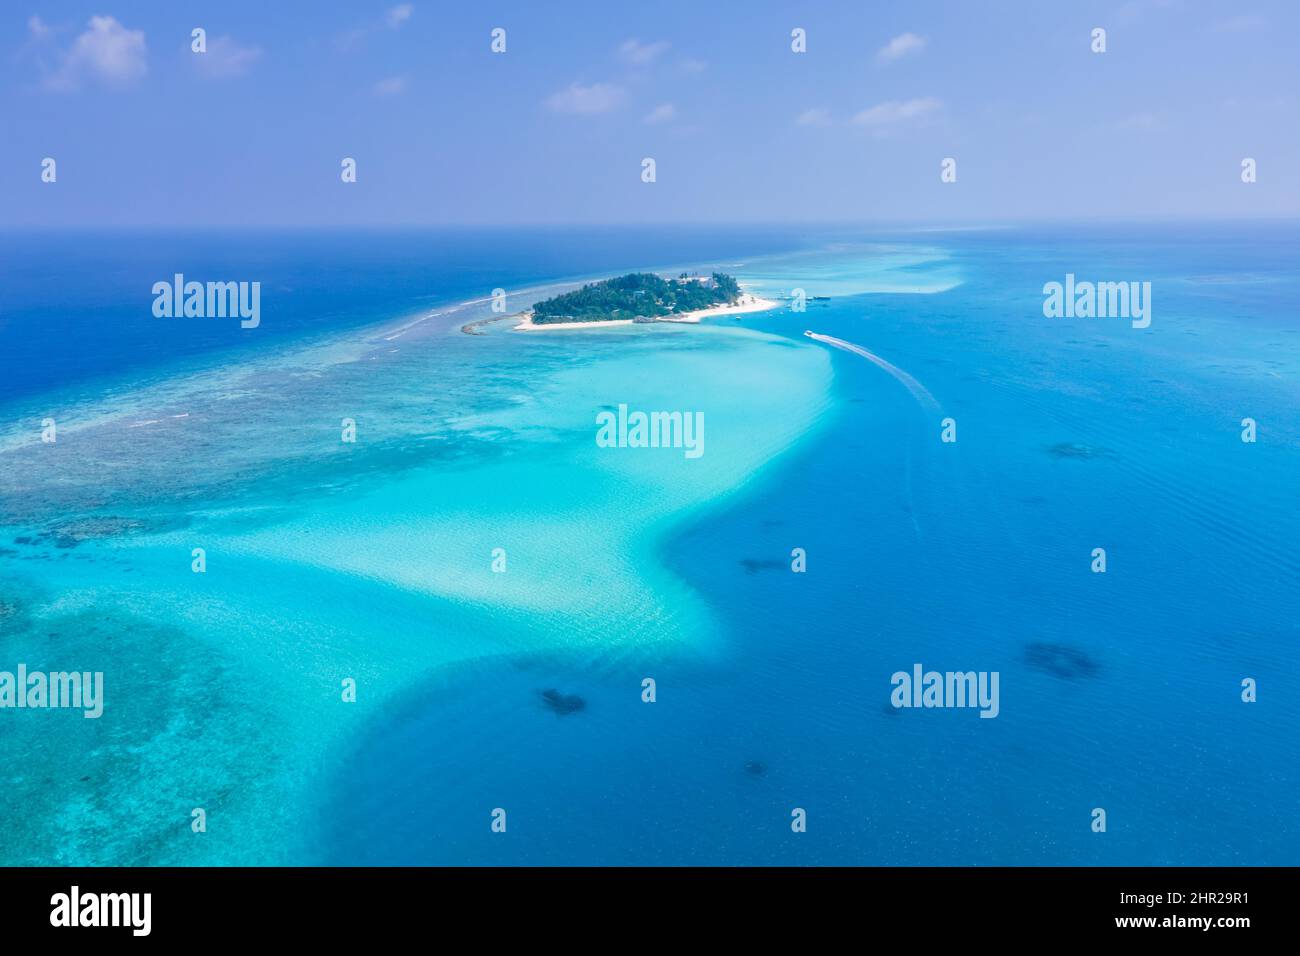 Atoll island with white sand beach, turquoise transparent water, coral reef, blue sky. Perfect tropical vacation holidays destination in Maldives. Aer Stock Photo